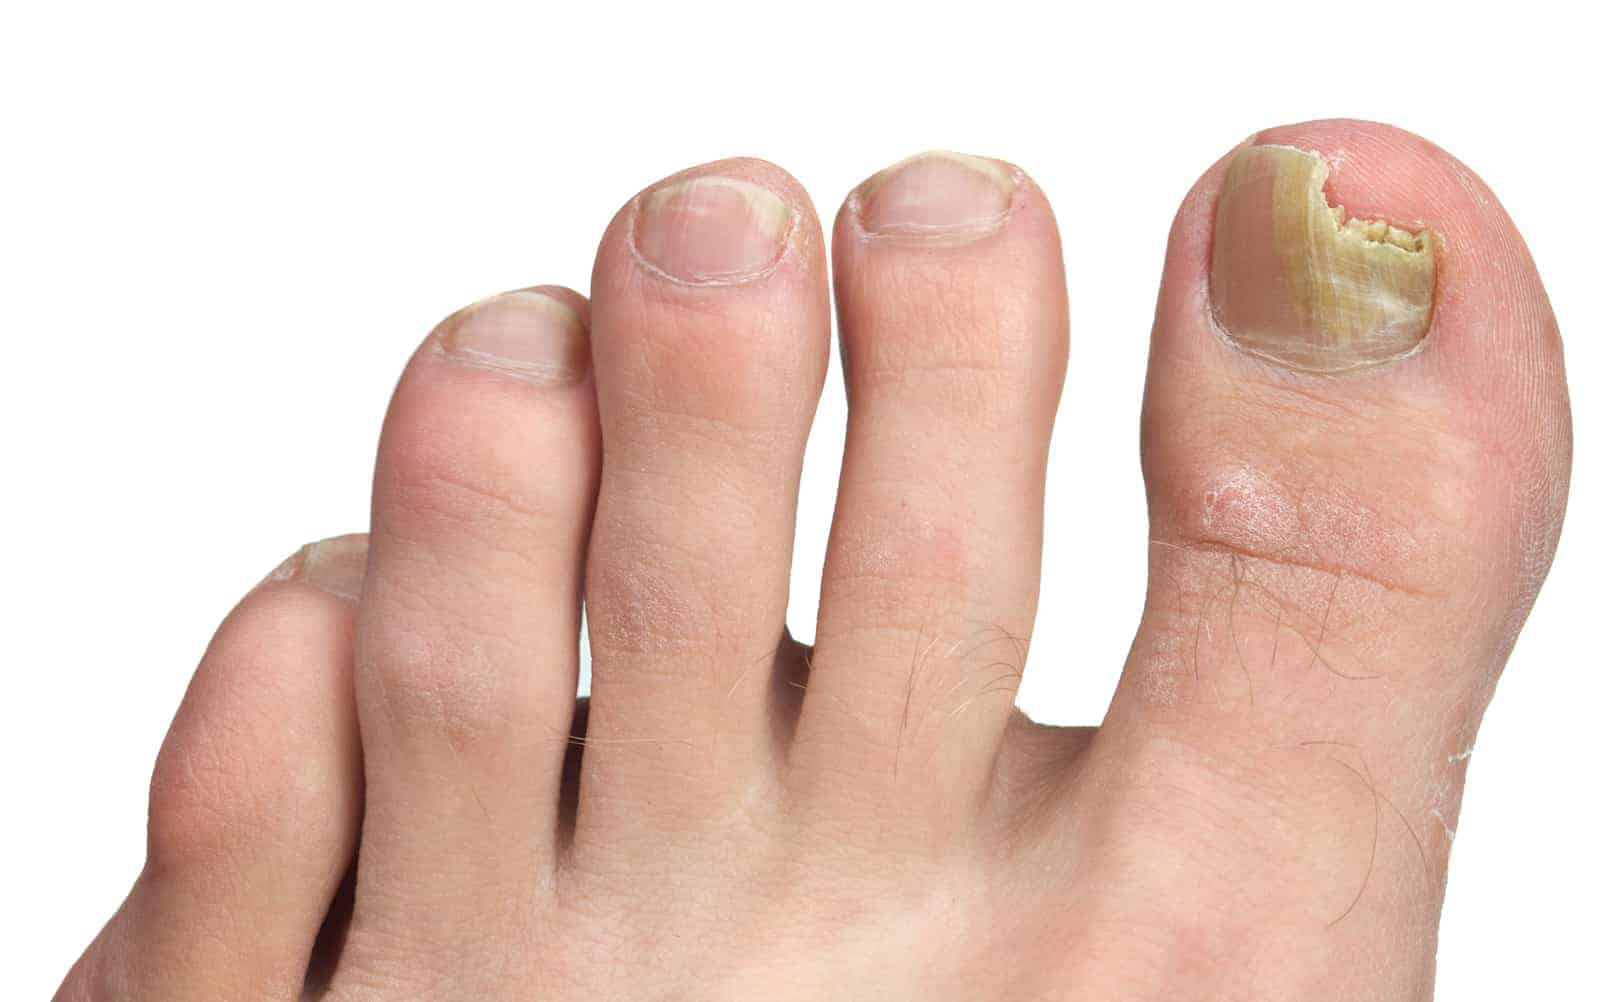 Antage Konvertere præst Does a Cracked Toenail Grow Back? Explained - Feet First Clinic